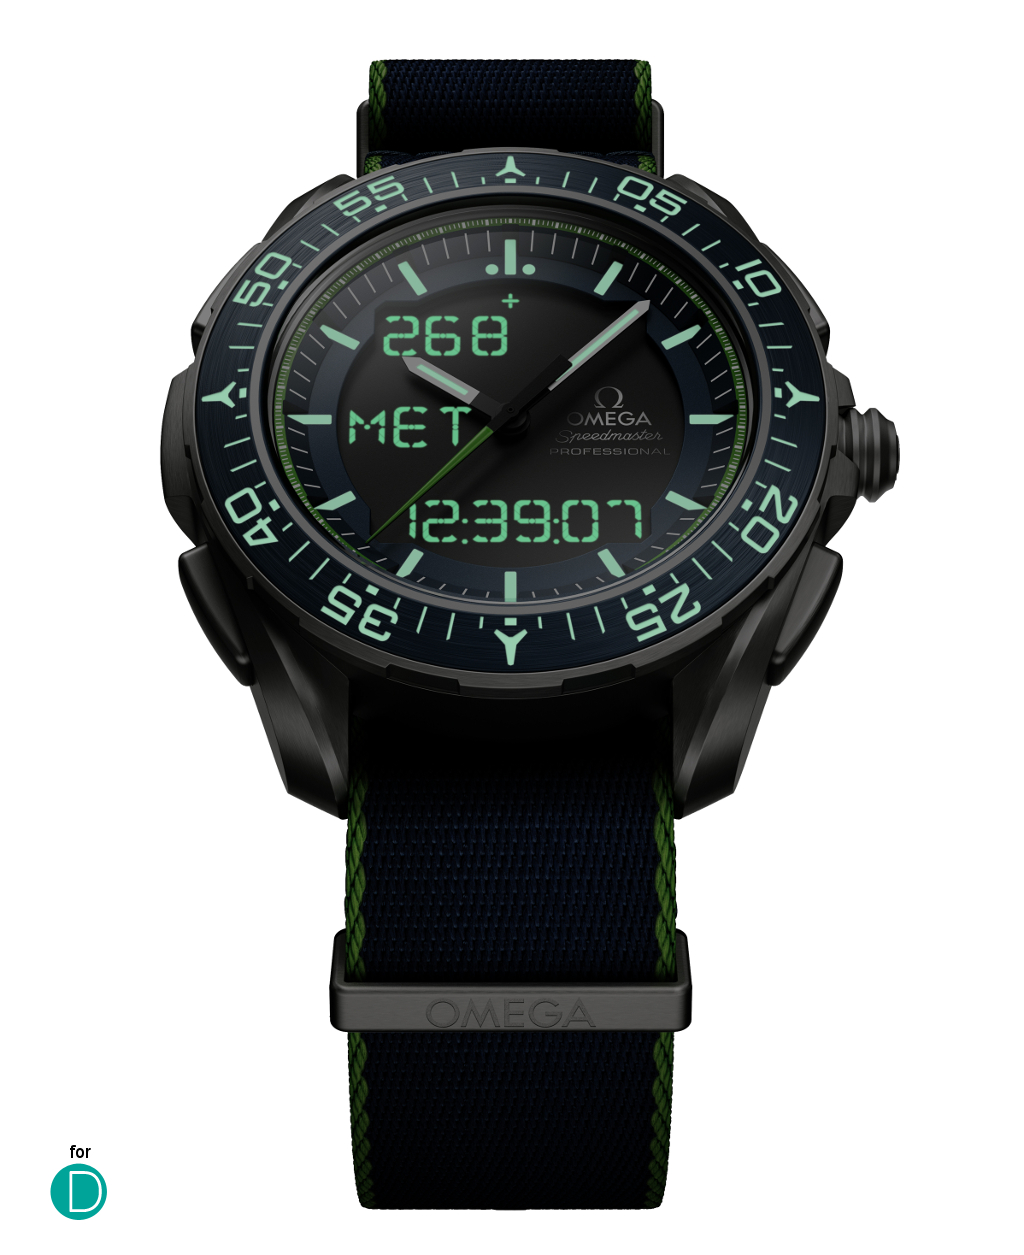 The X-33 is actually a rather handsome watch. This picture shows how the watch will look like in the dark.